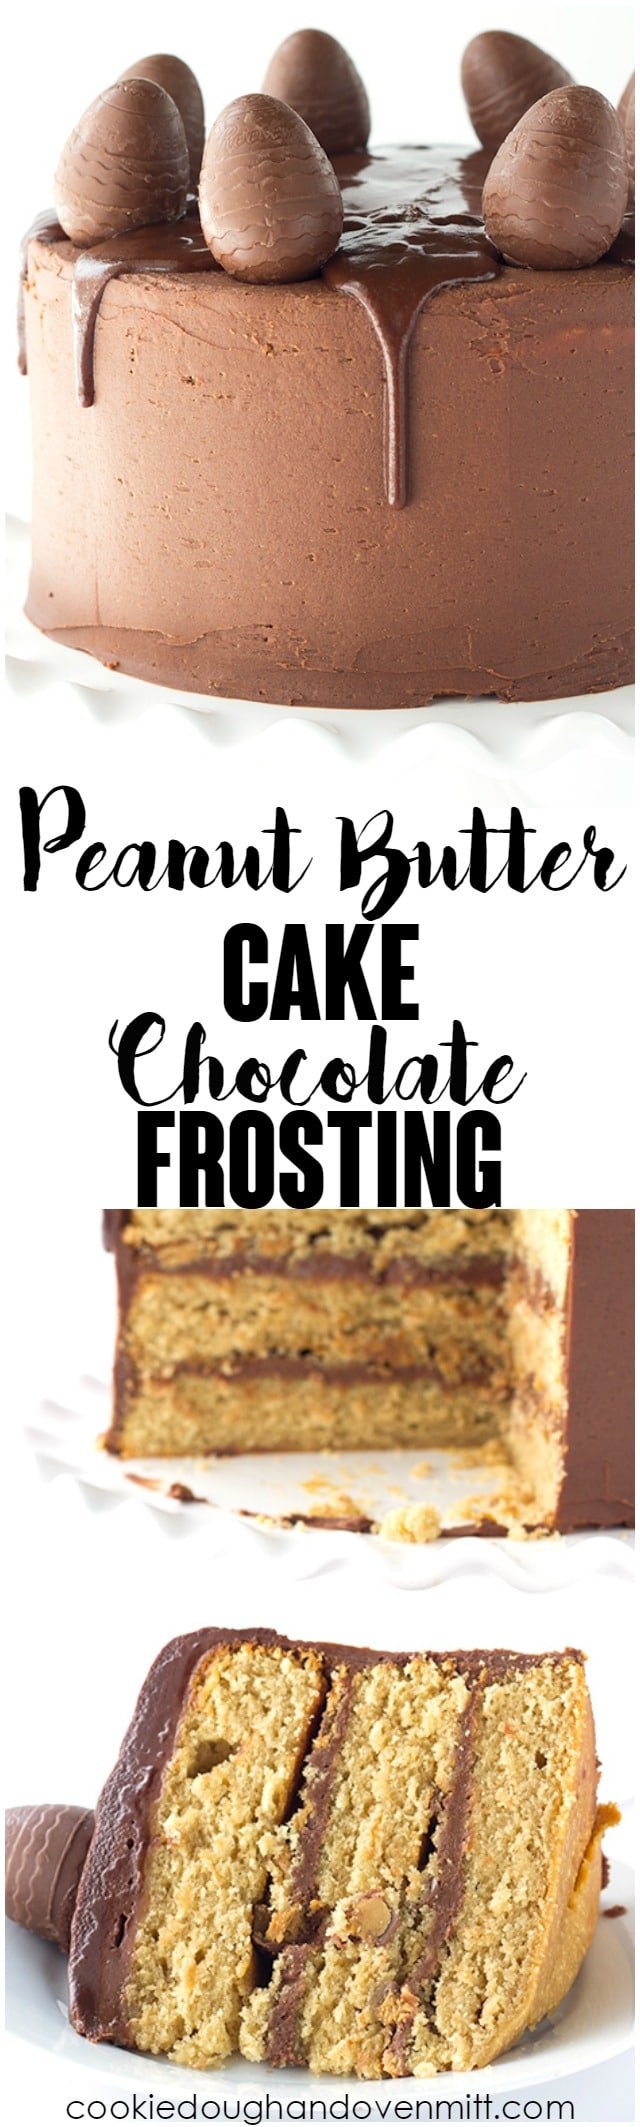 Peanut Butter Cake with Chocolate Frosting - peanut butter cake filled with chocolate frosting and chopped peanut butter cups. Top this cake with a chocolate peanut butter ganache and cute peanut butter filled chocolate eggs for EASTER!